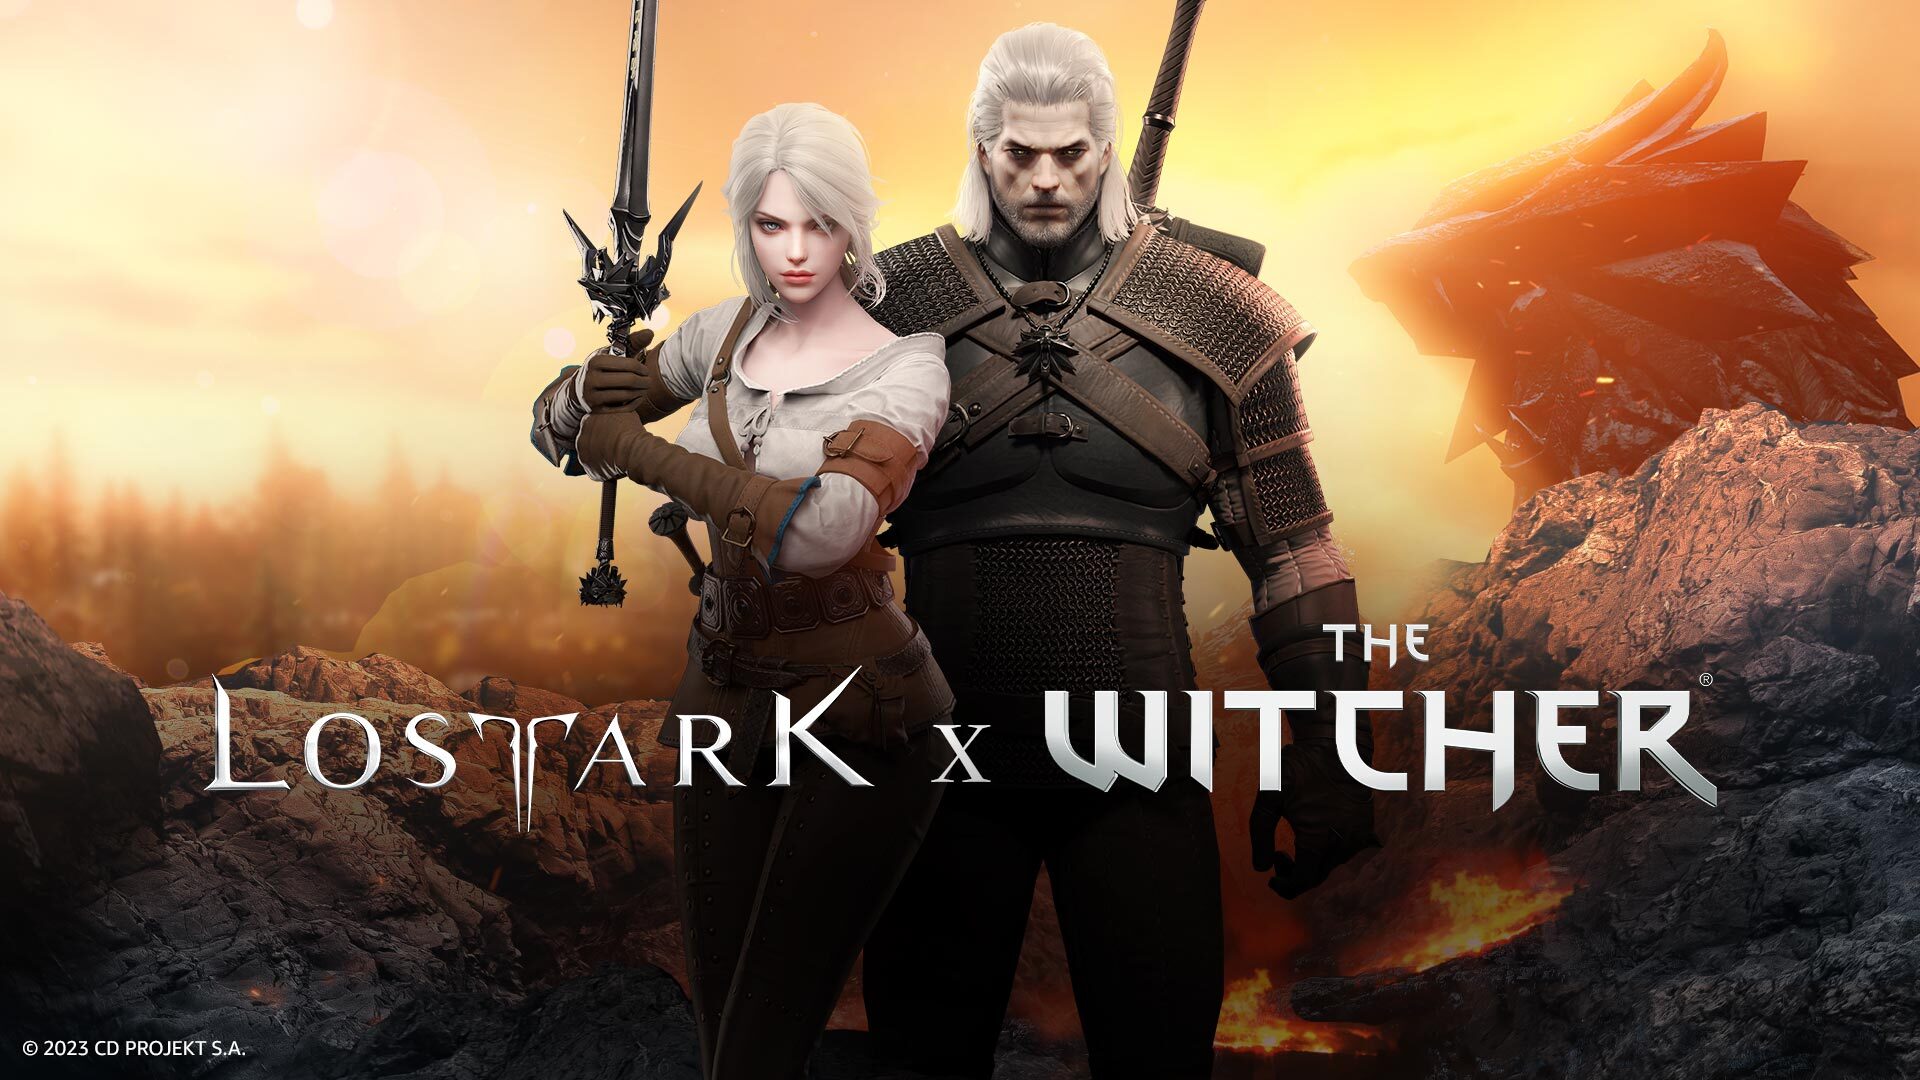 Lost Ark’s The Witcher event is currently underway